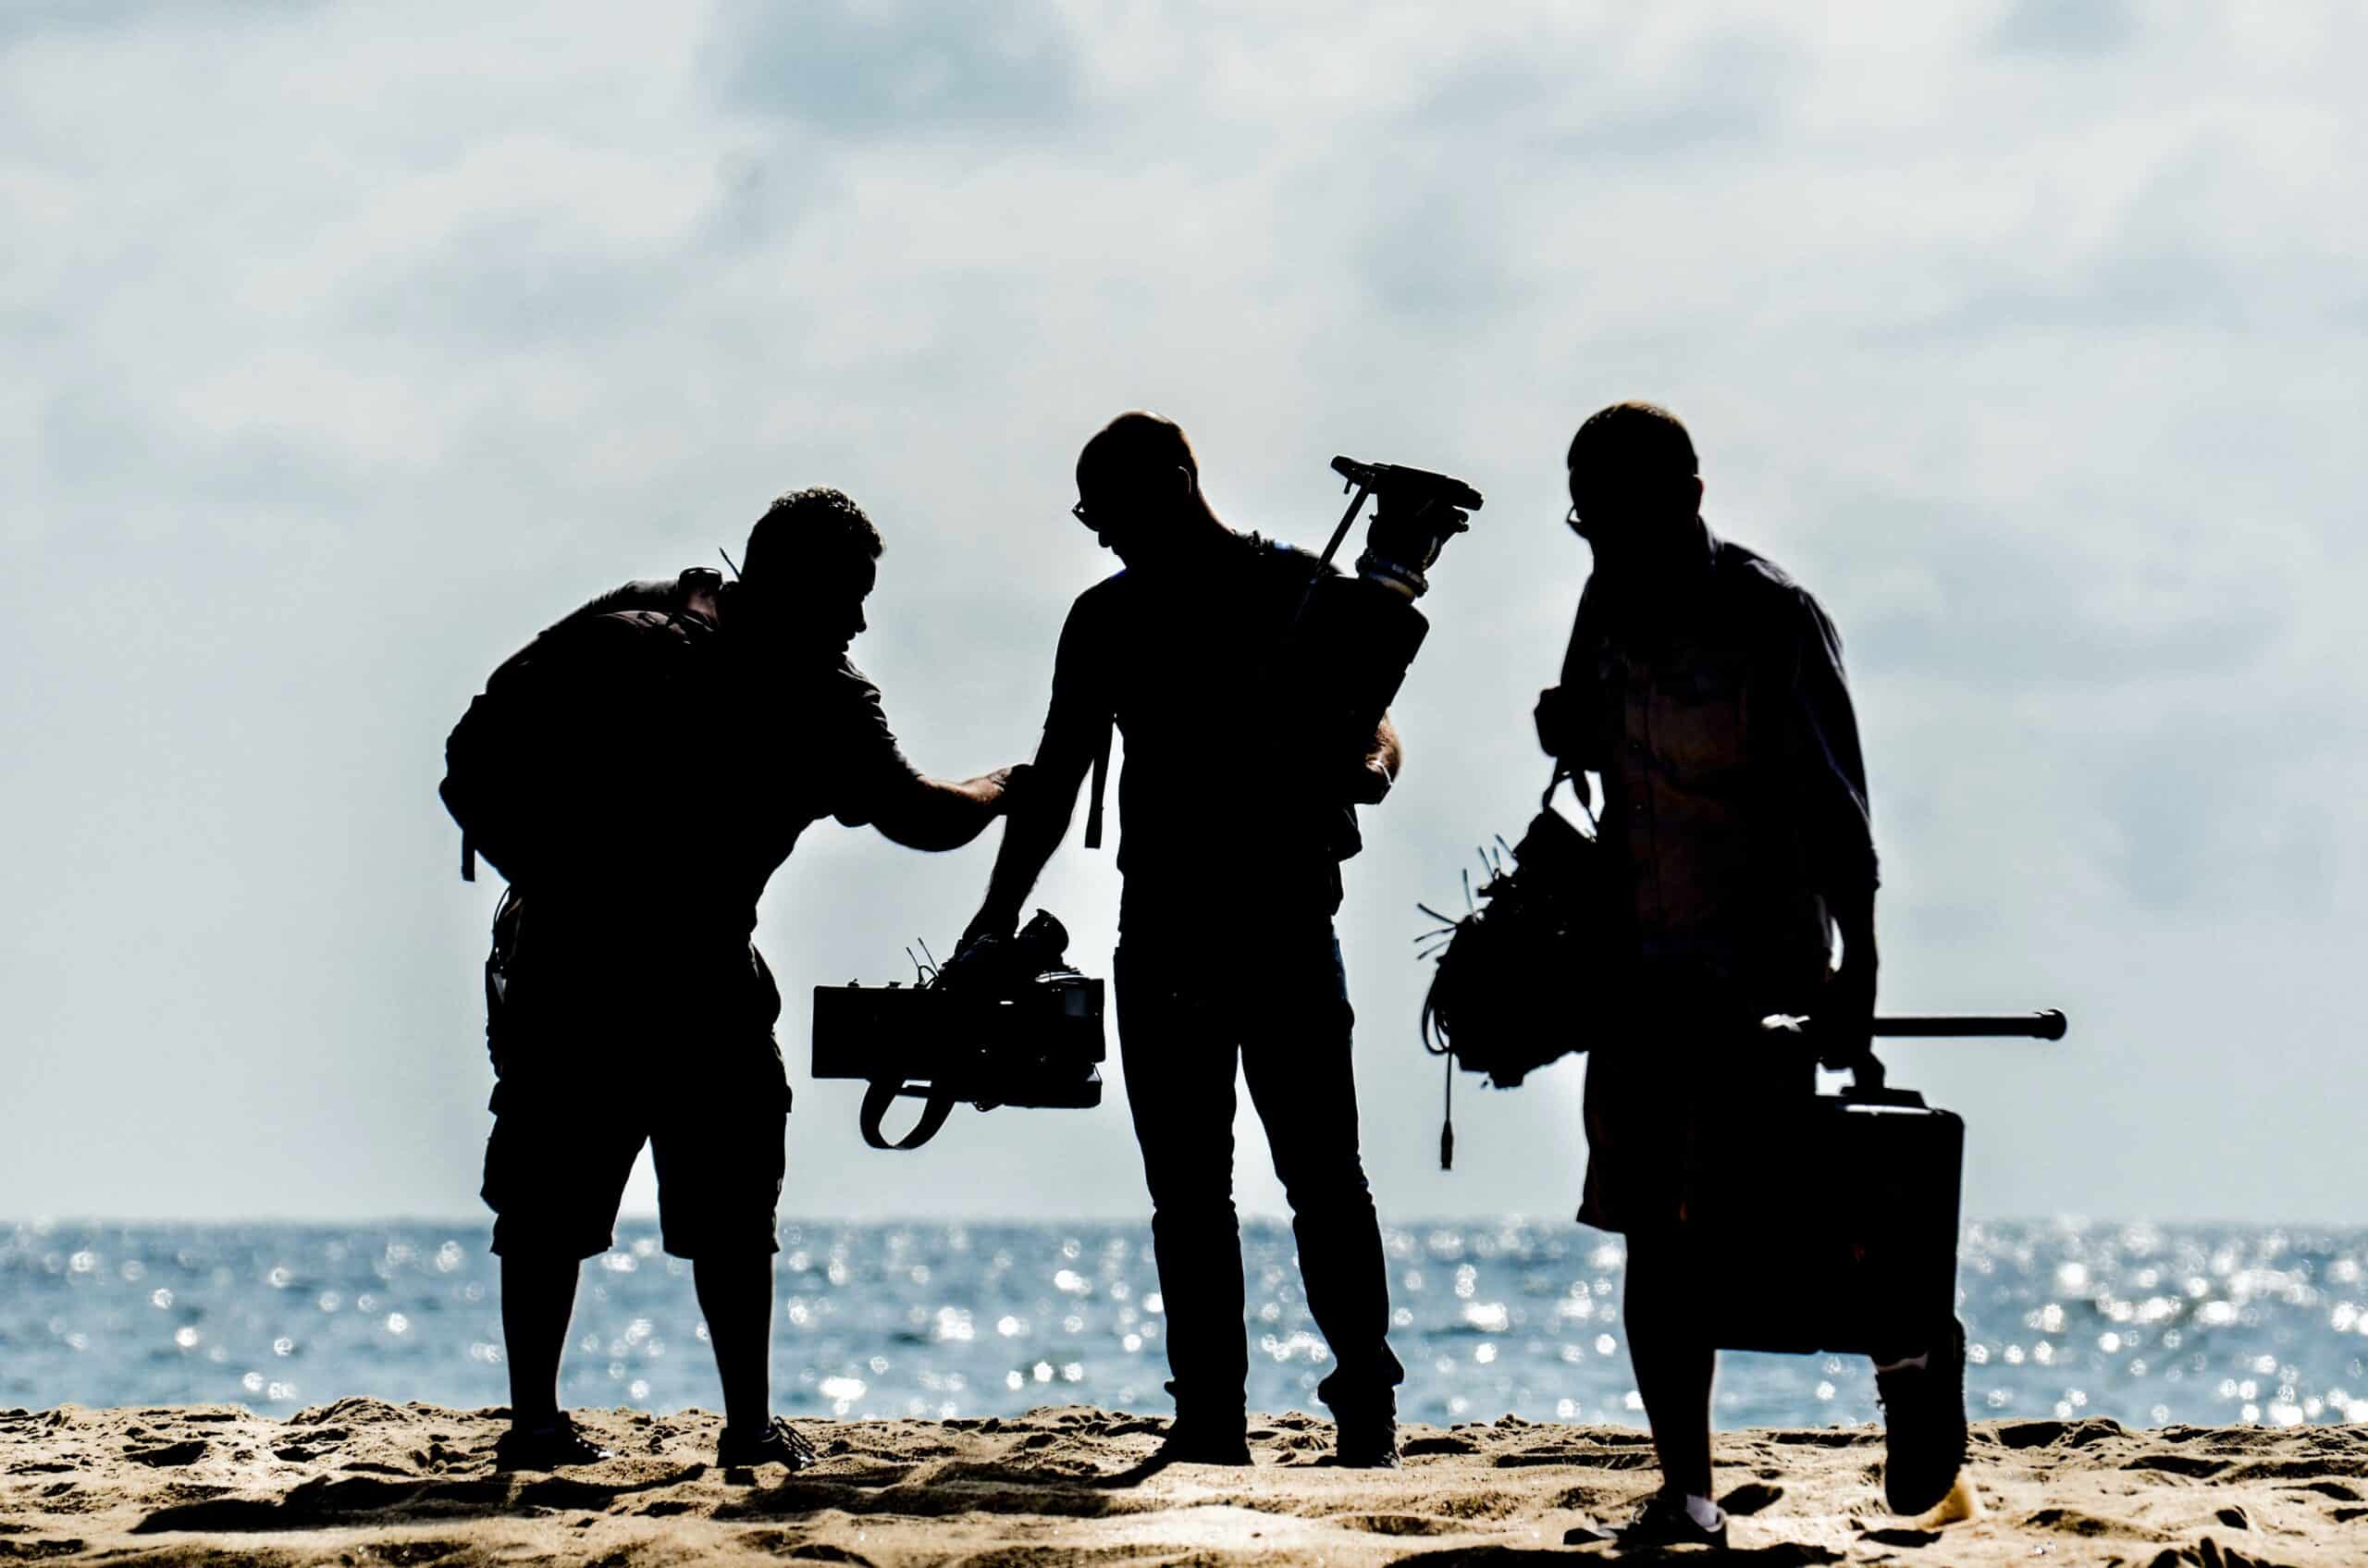 A team of three videographers from Concept Films carry video equipment on a beach during a full-day shoot.